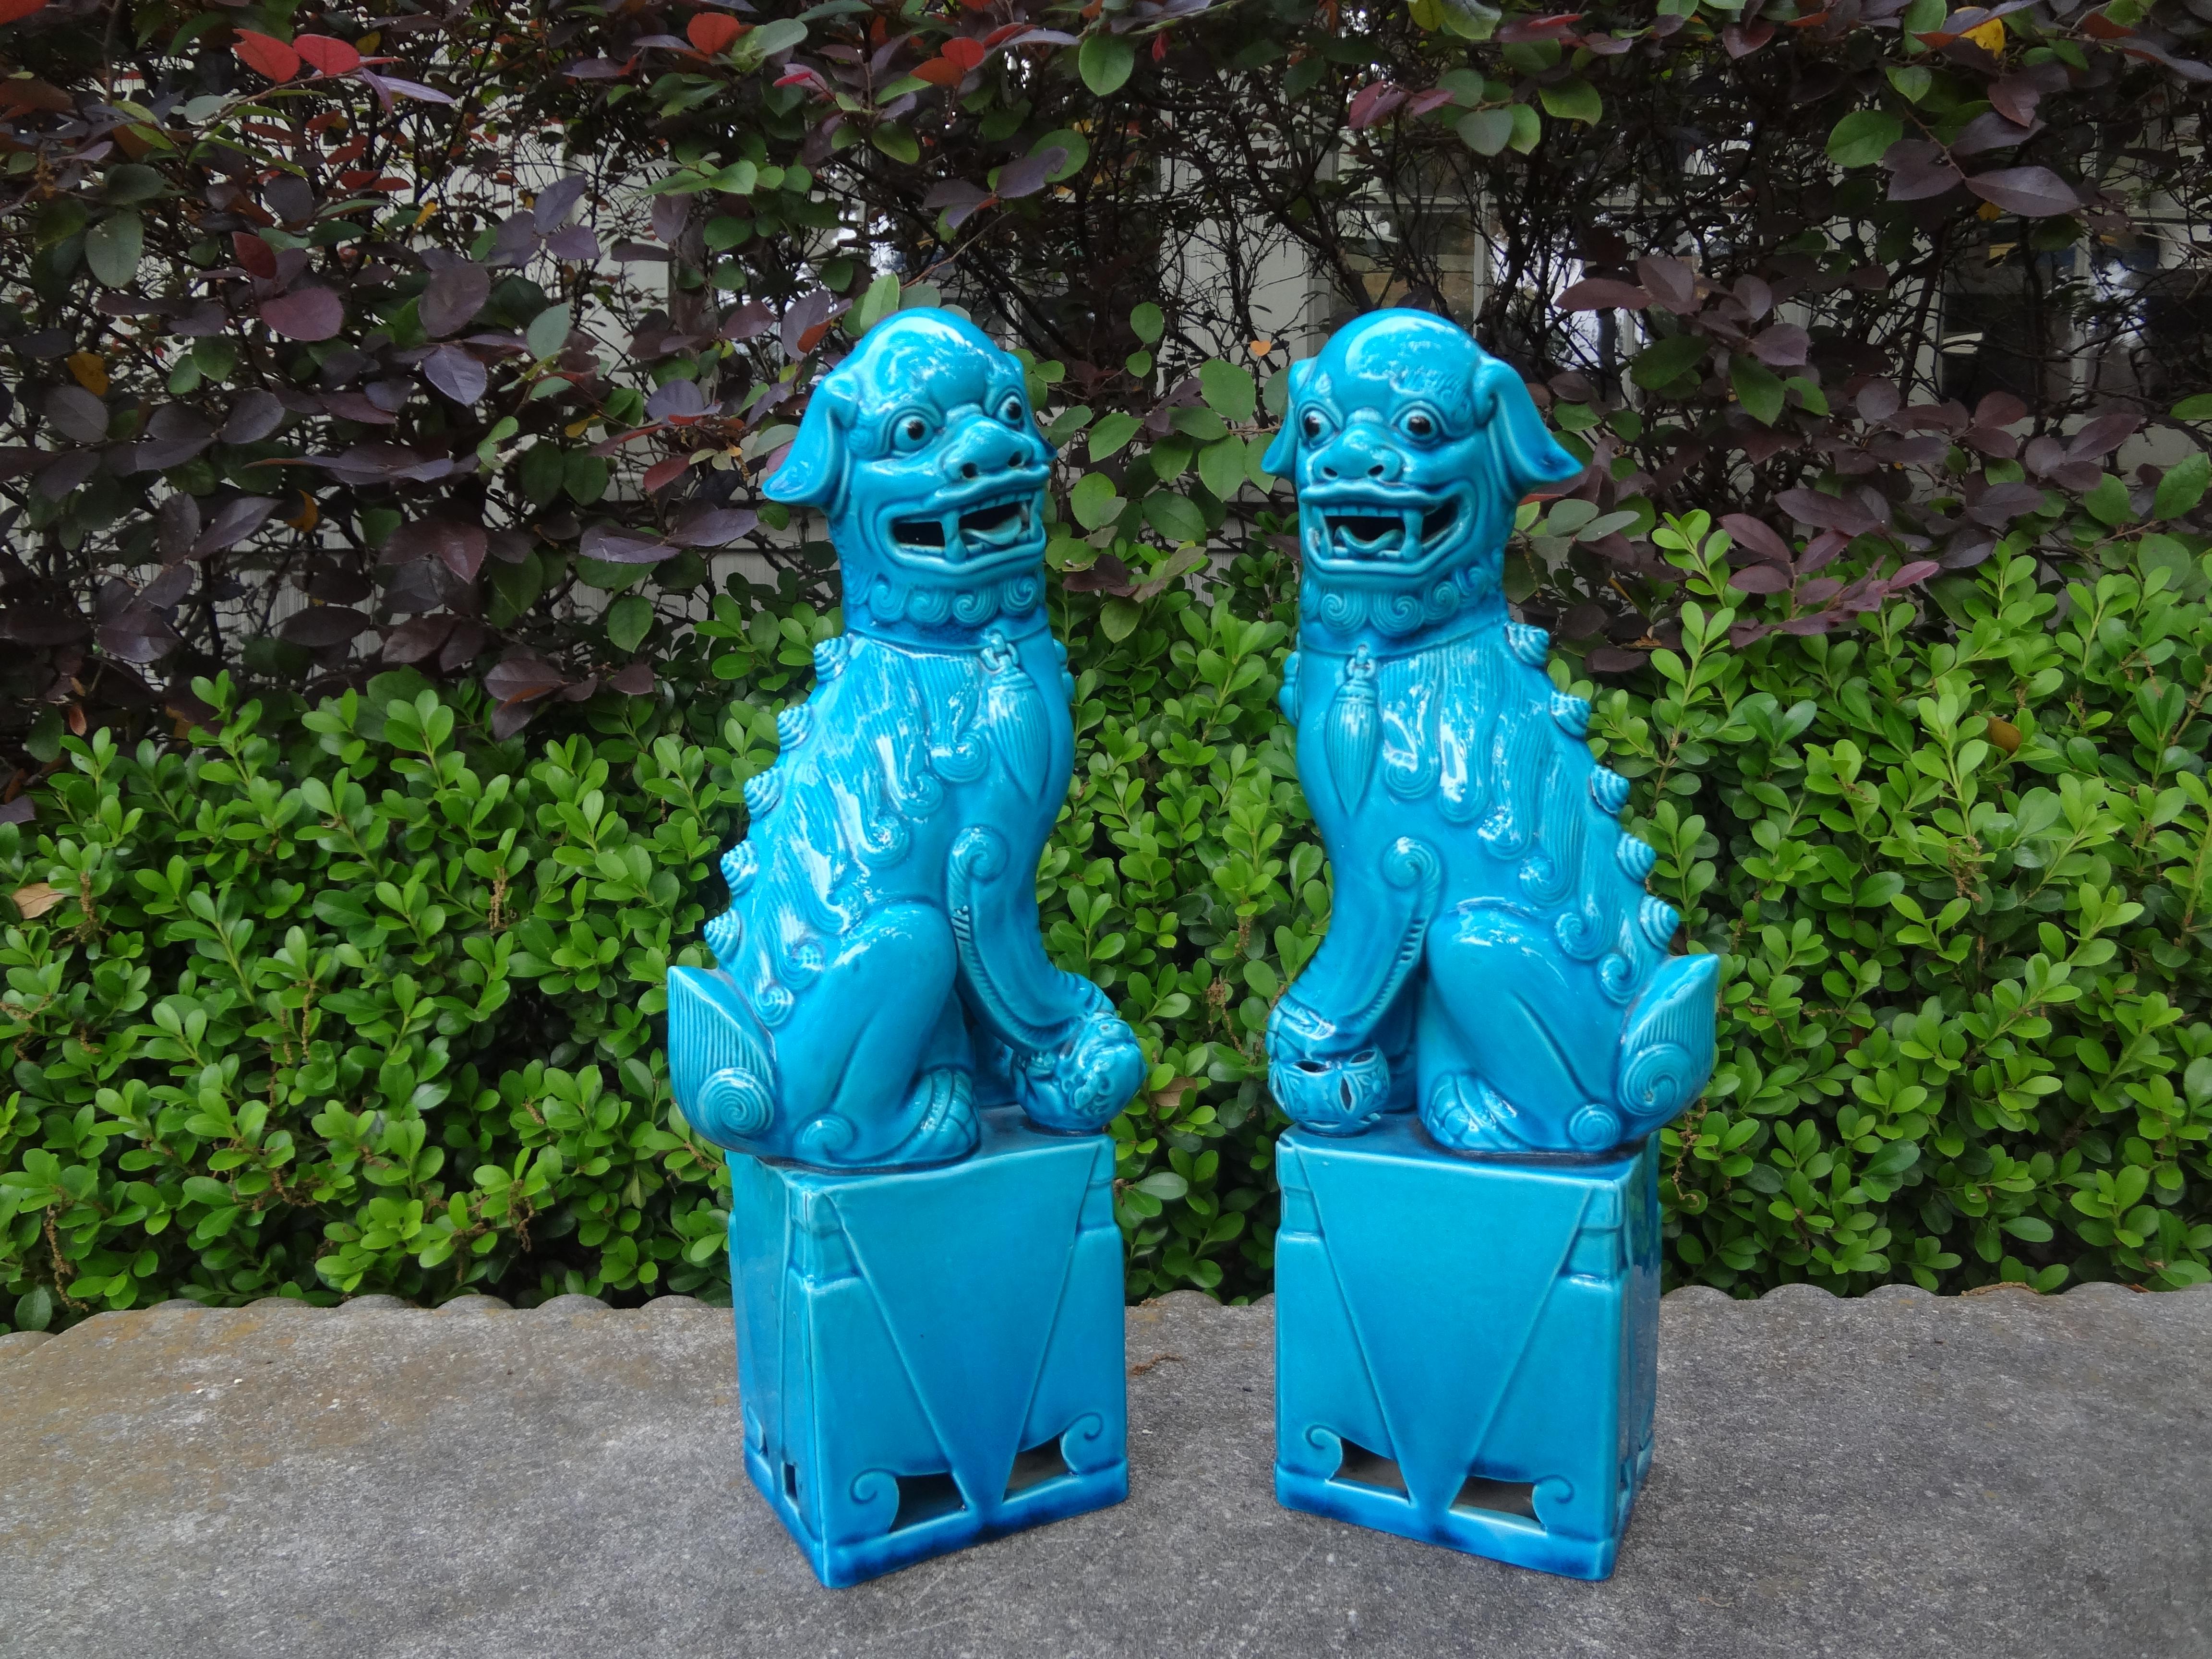 Pair Of Chinese Turquoise Glazed Porcelain Foo Dogs.
A large pair of Chinese turquoise glazed foo dogs dating from the first half of the 20th century. This lovely pair of glazed porcelain foo dogs are mounted on raised plinths.
A true pair each